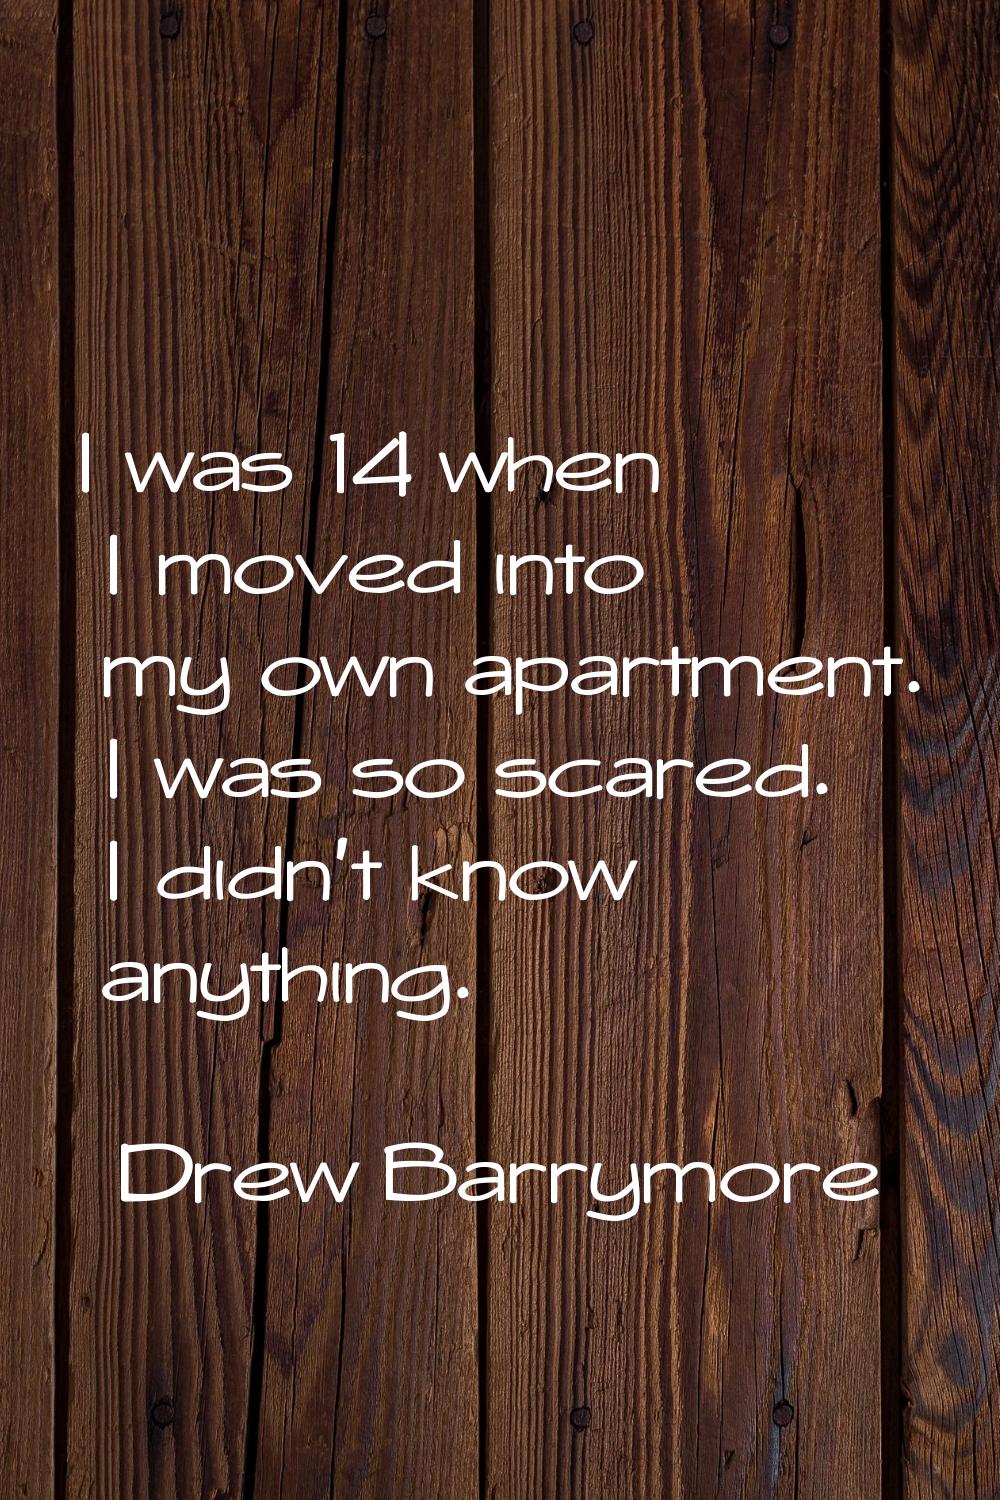 I was 14 when I moved into my own apartment. I was so scared. I didn't know anything.